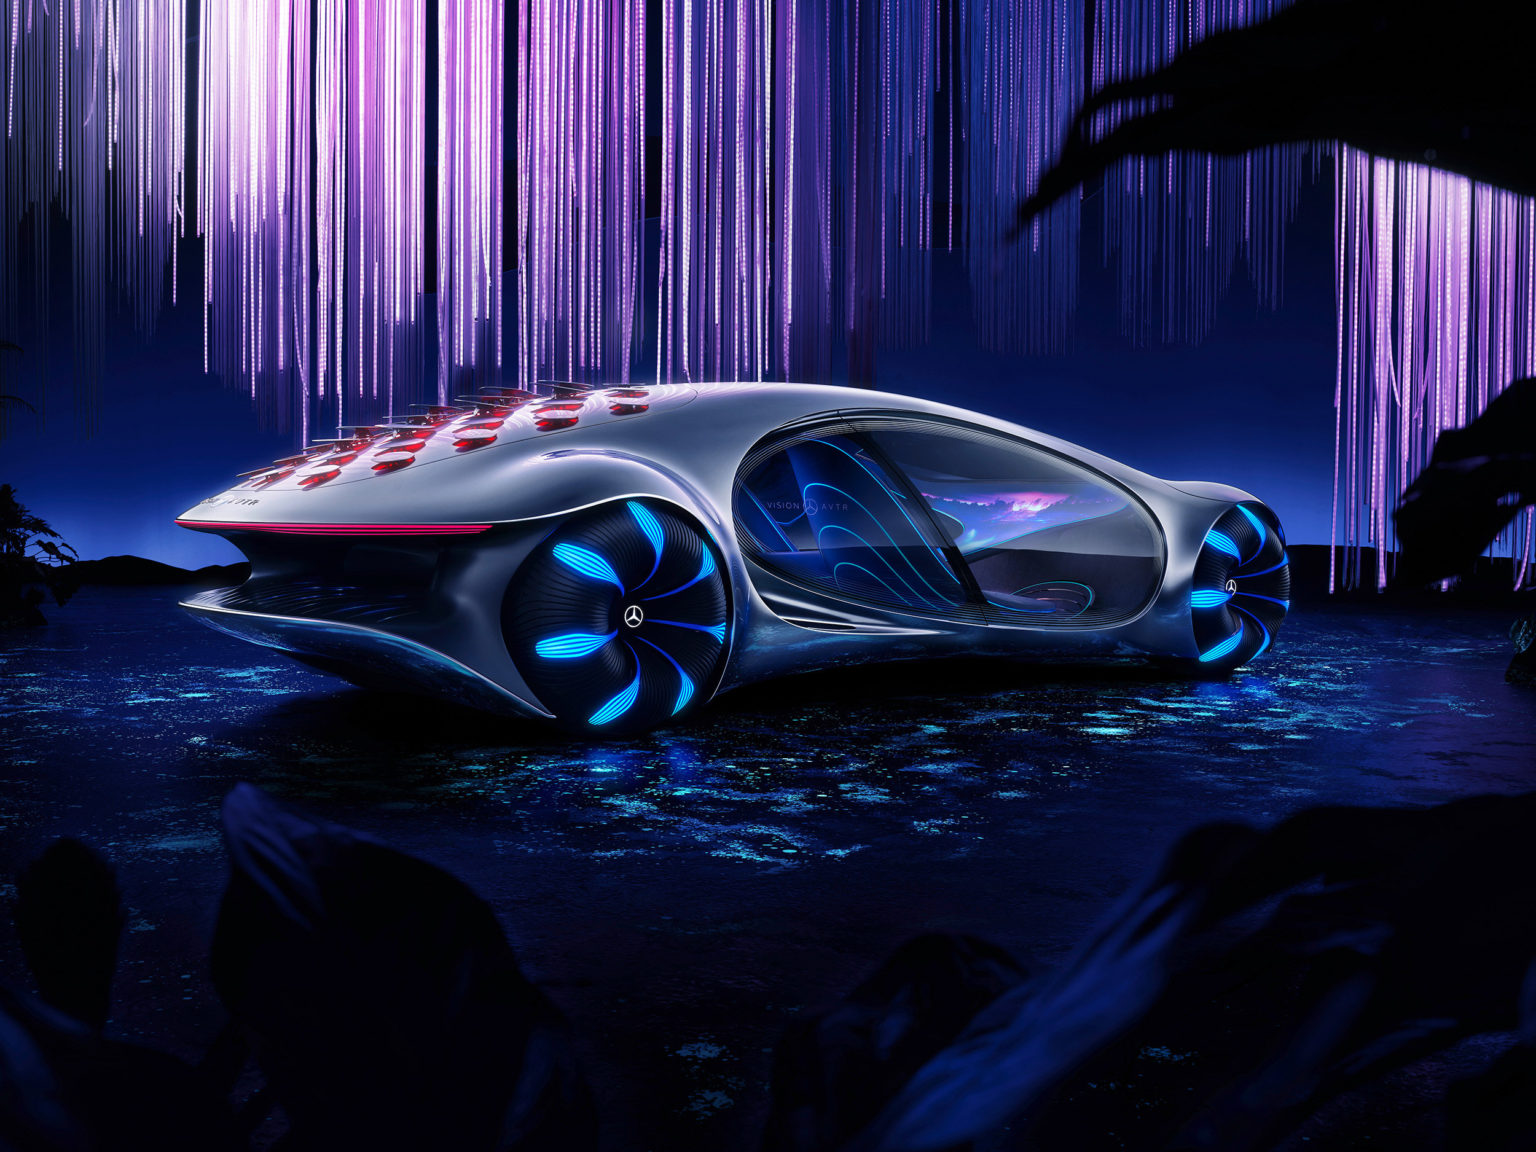 Mercedes has created a new concept car that is otherworldly.